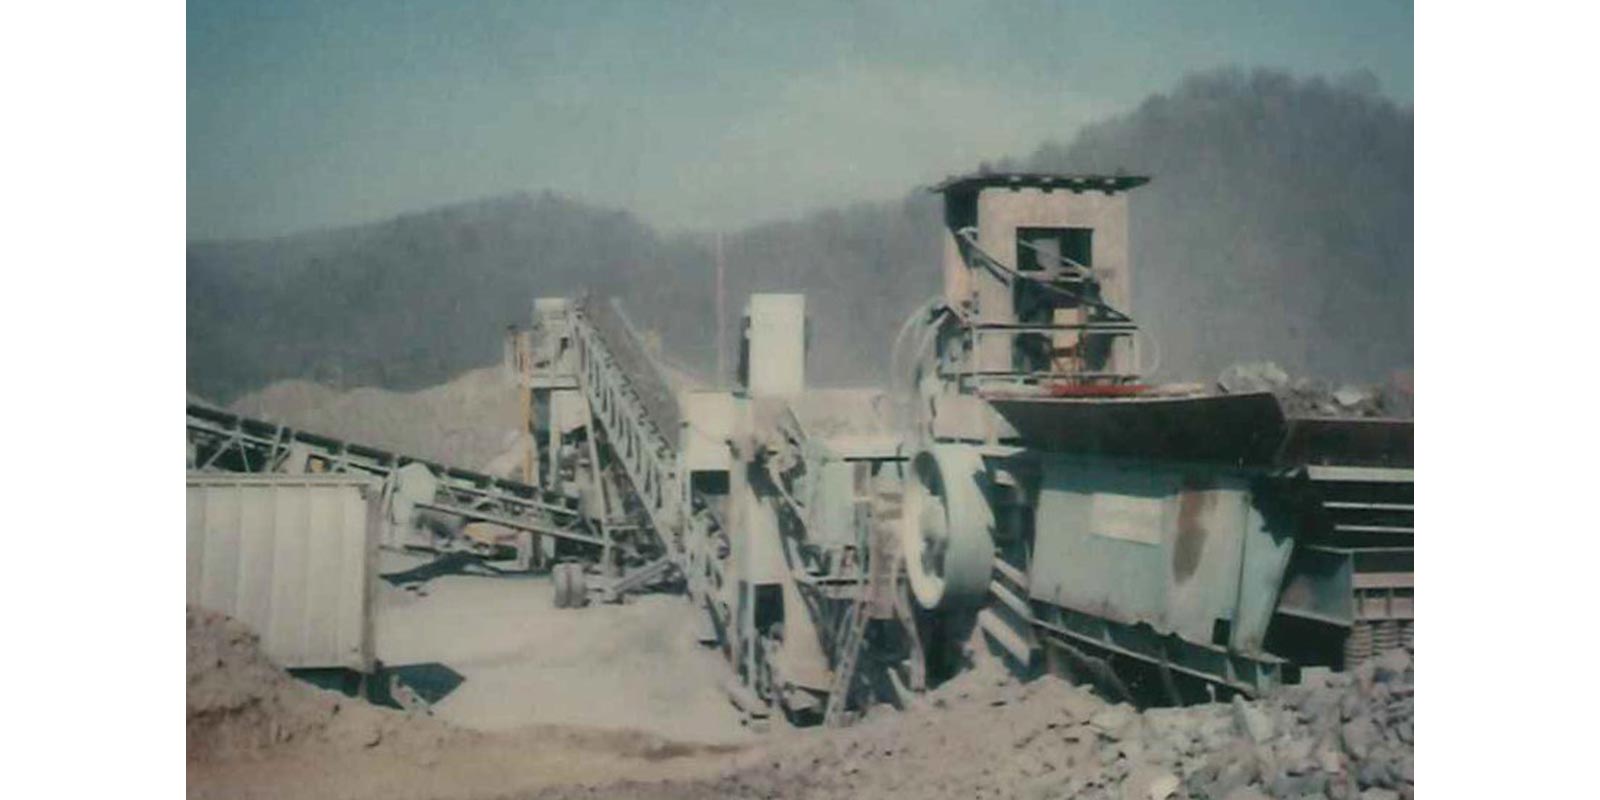 stone crushing historical photograph of crushing equipment on a work site